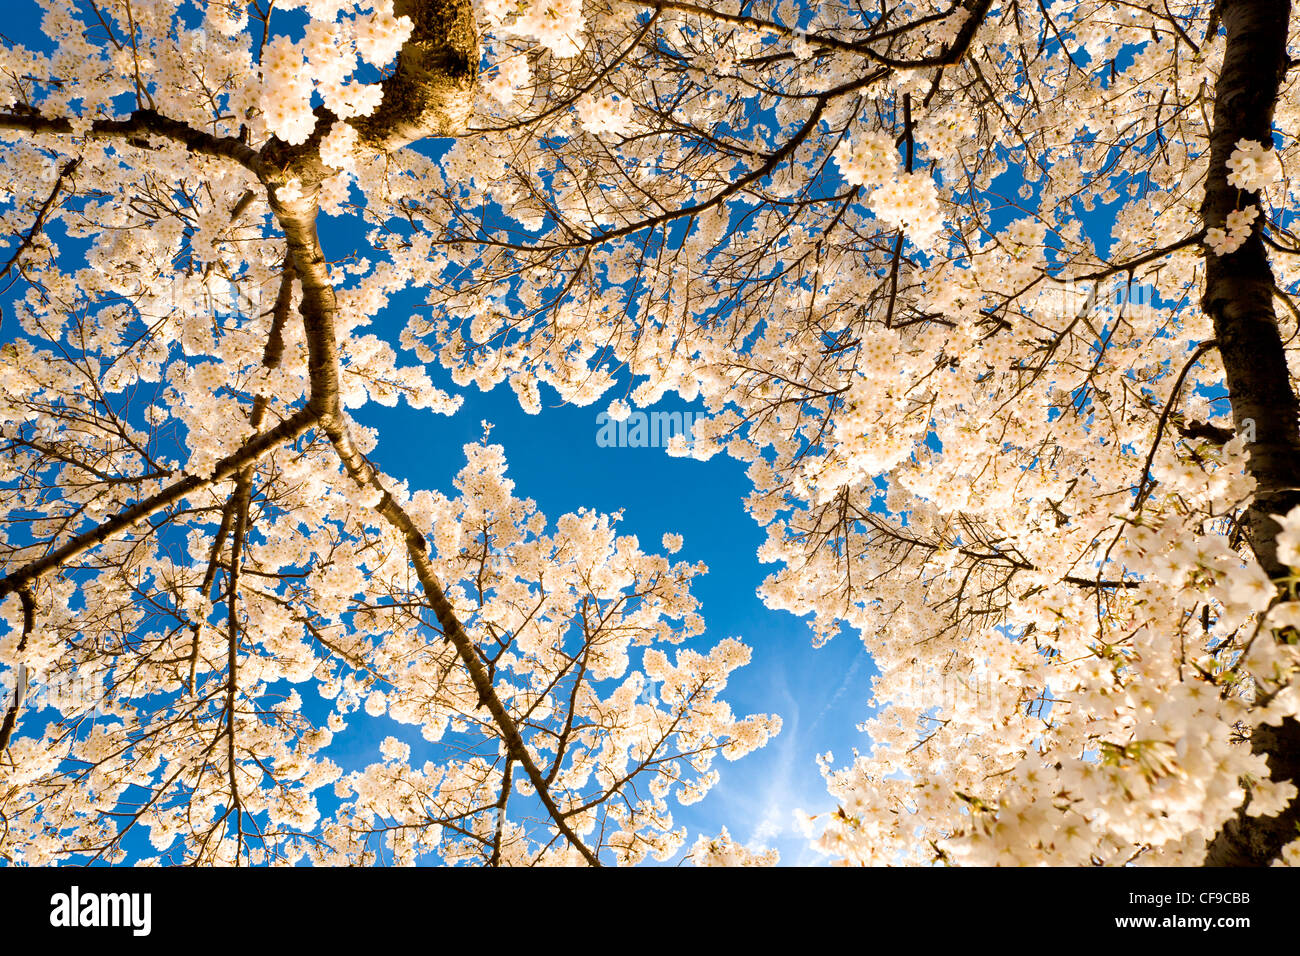 Sunlight shining through the branches of cherry blossom trees in full peak bloom overhead. American Hanami in Washington DC. Stock Photo